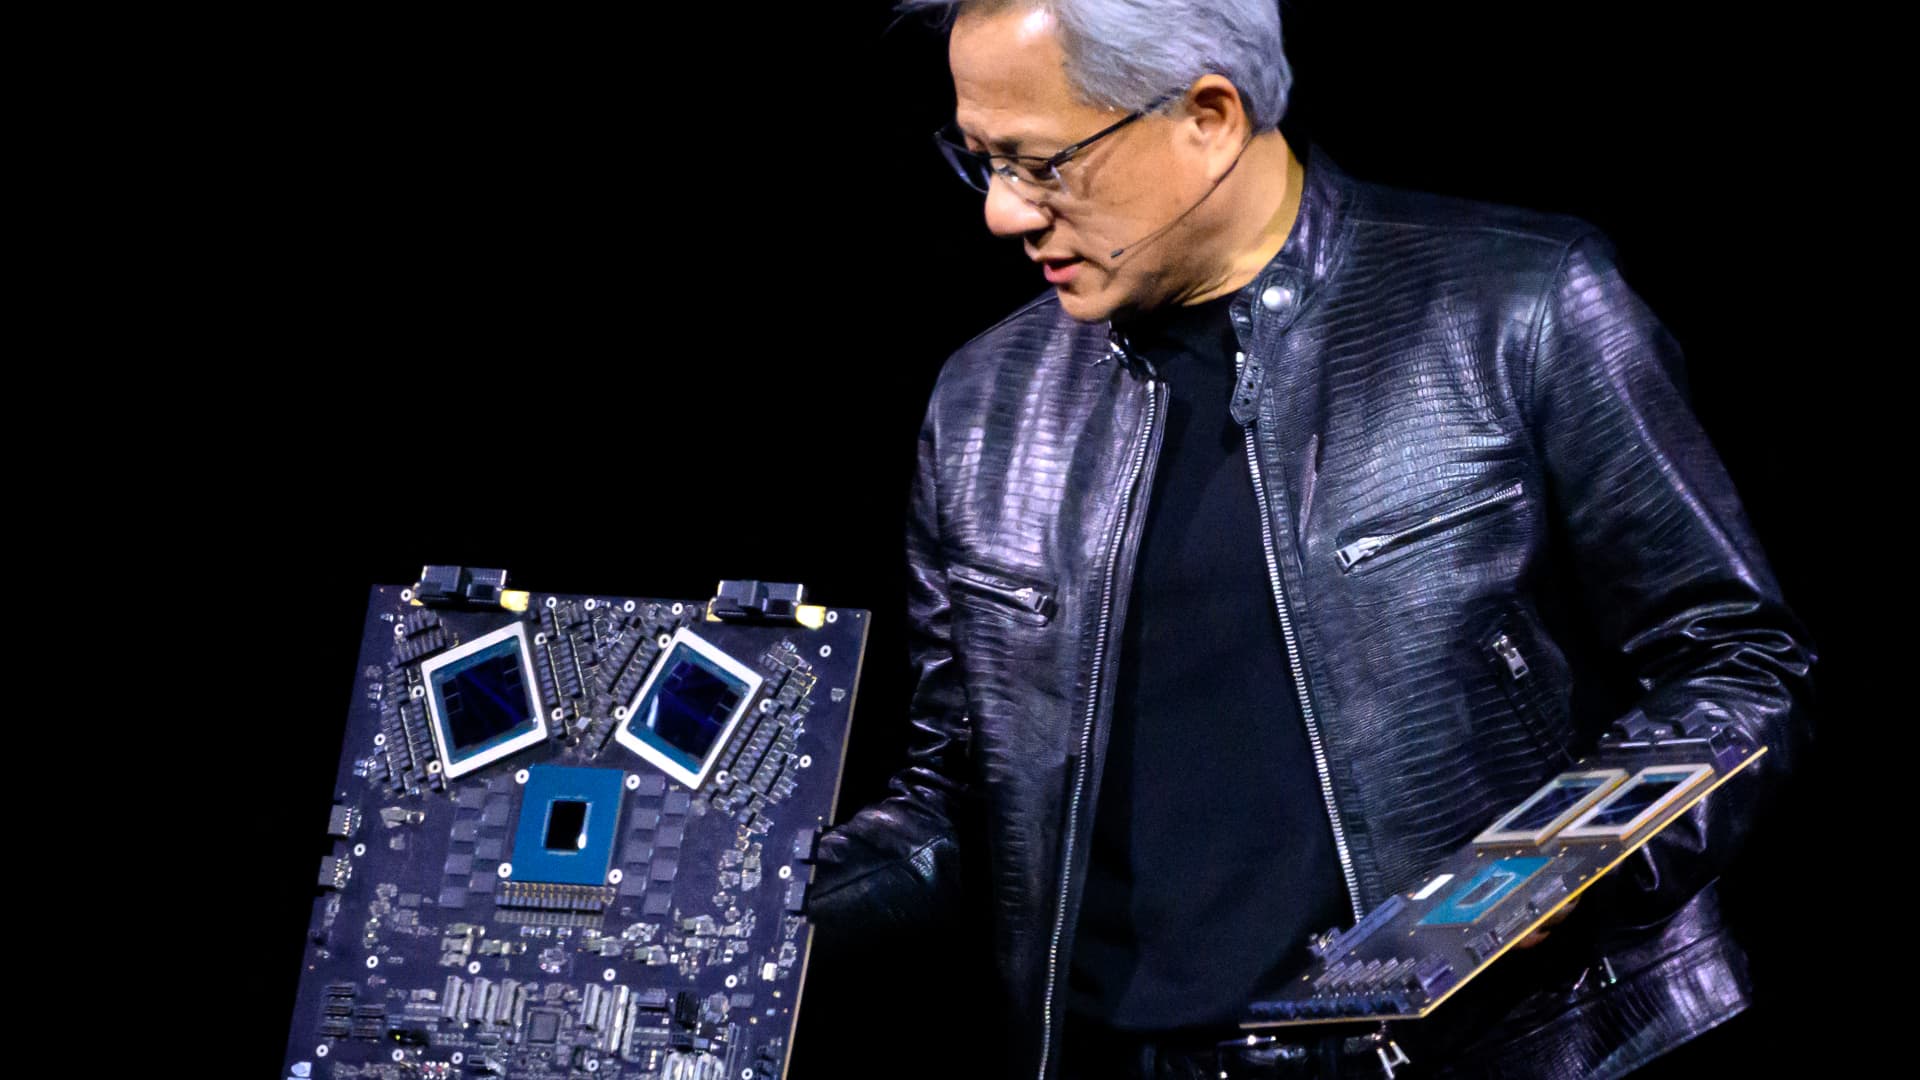 Nvidia     shares fell 10% during trading on Friday, the worst day for the GPU maker since March 2020, when the chipmaker's value was just one-tw